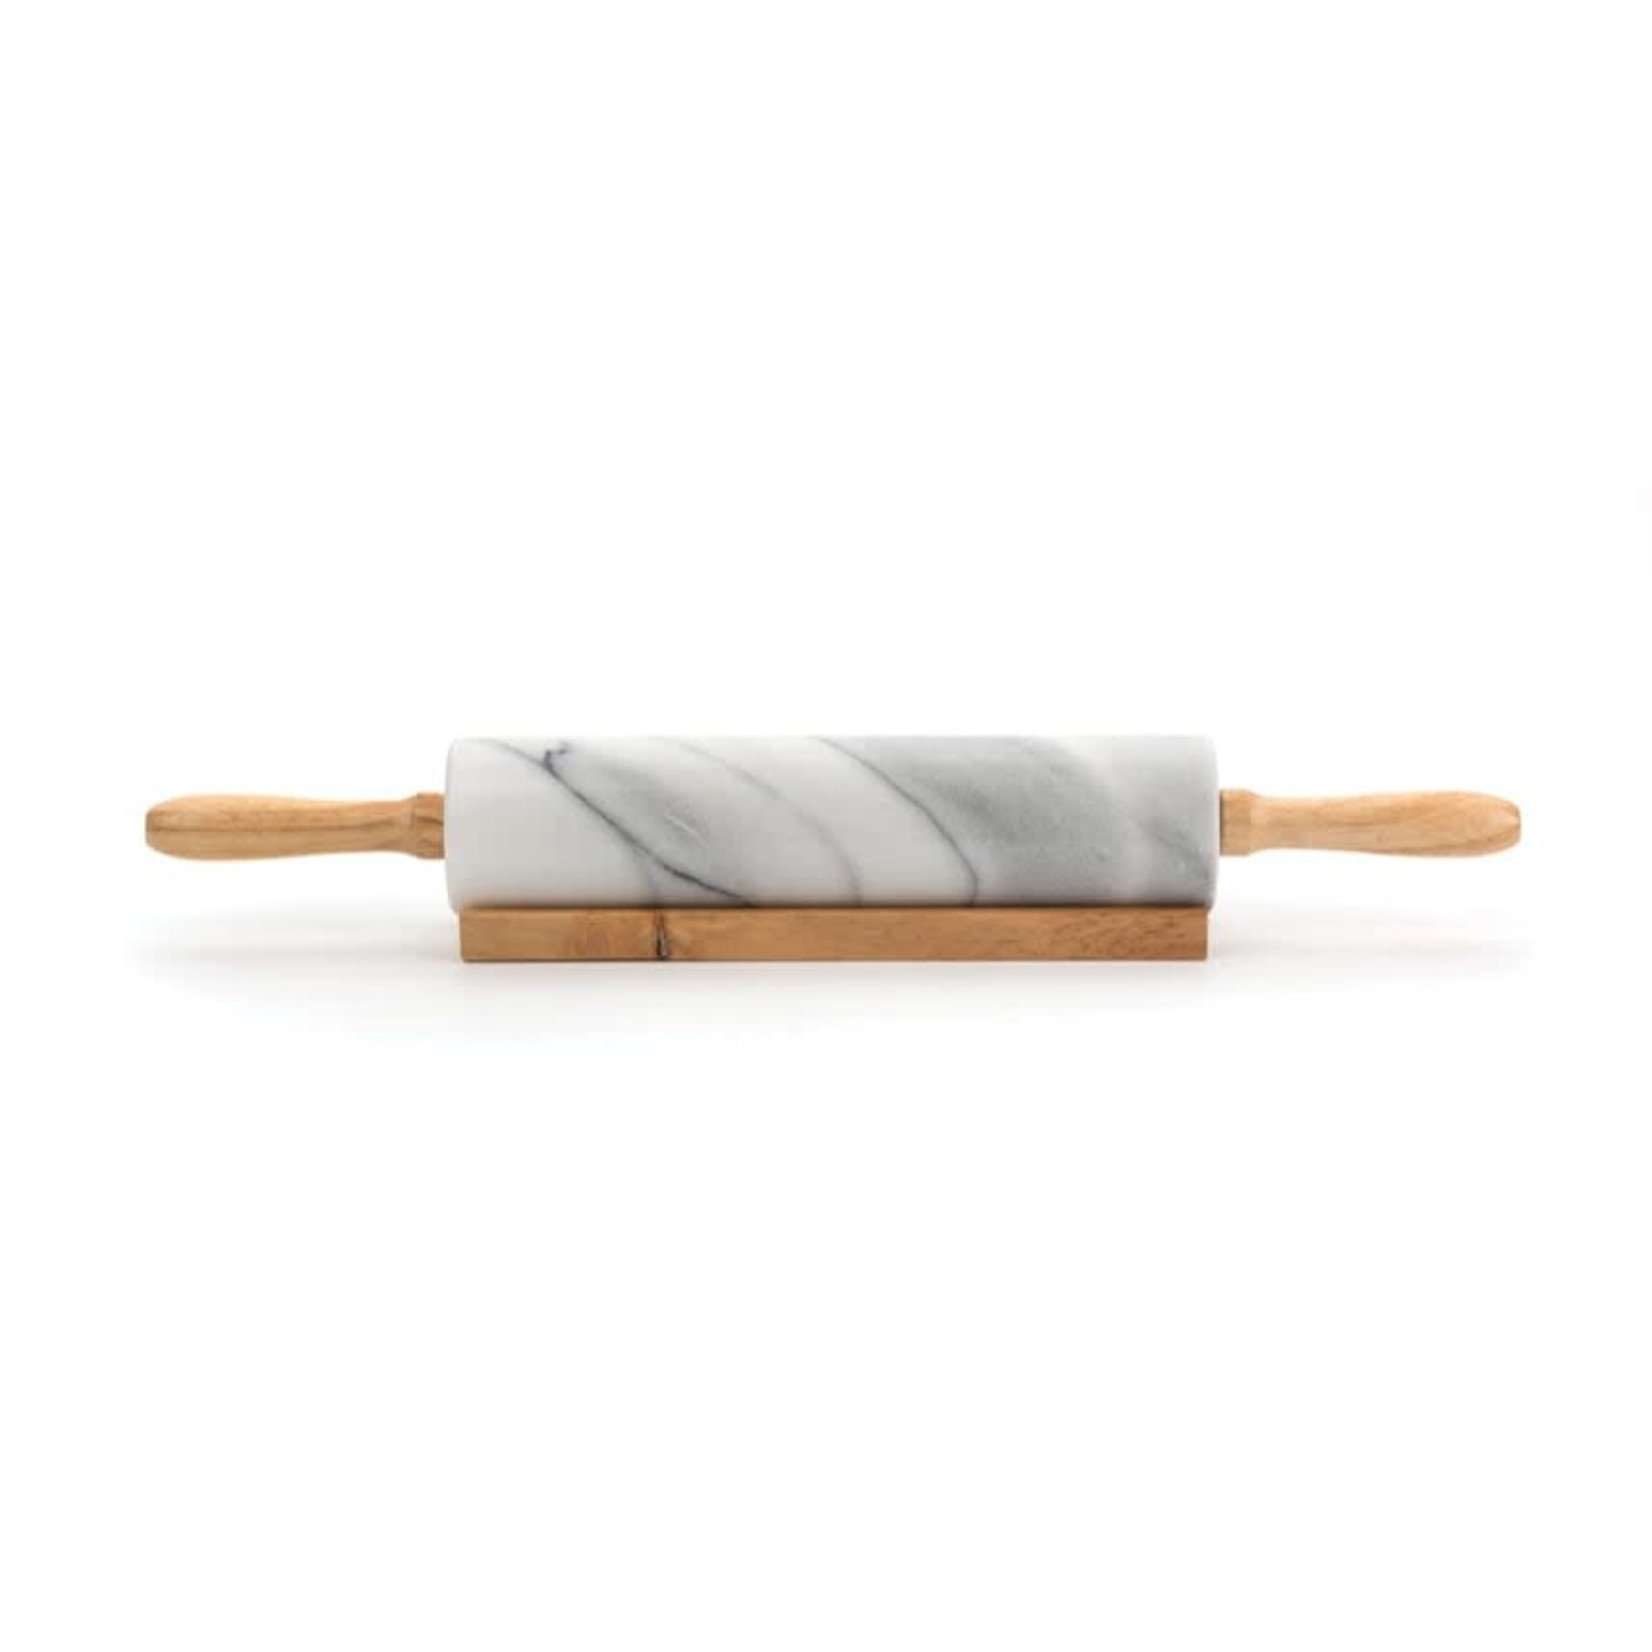 RSVP RSVP Marble Rolling Pin with Base - White DNR